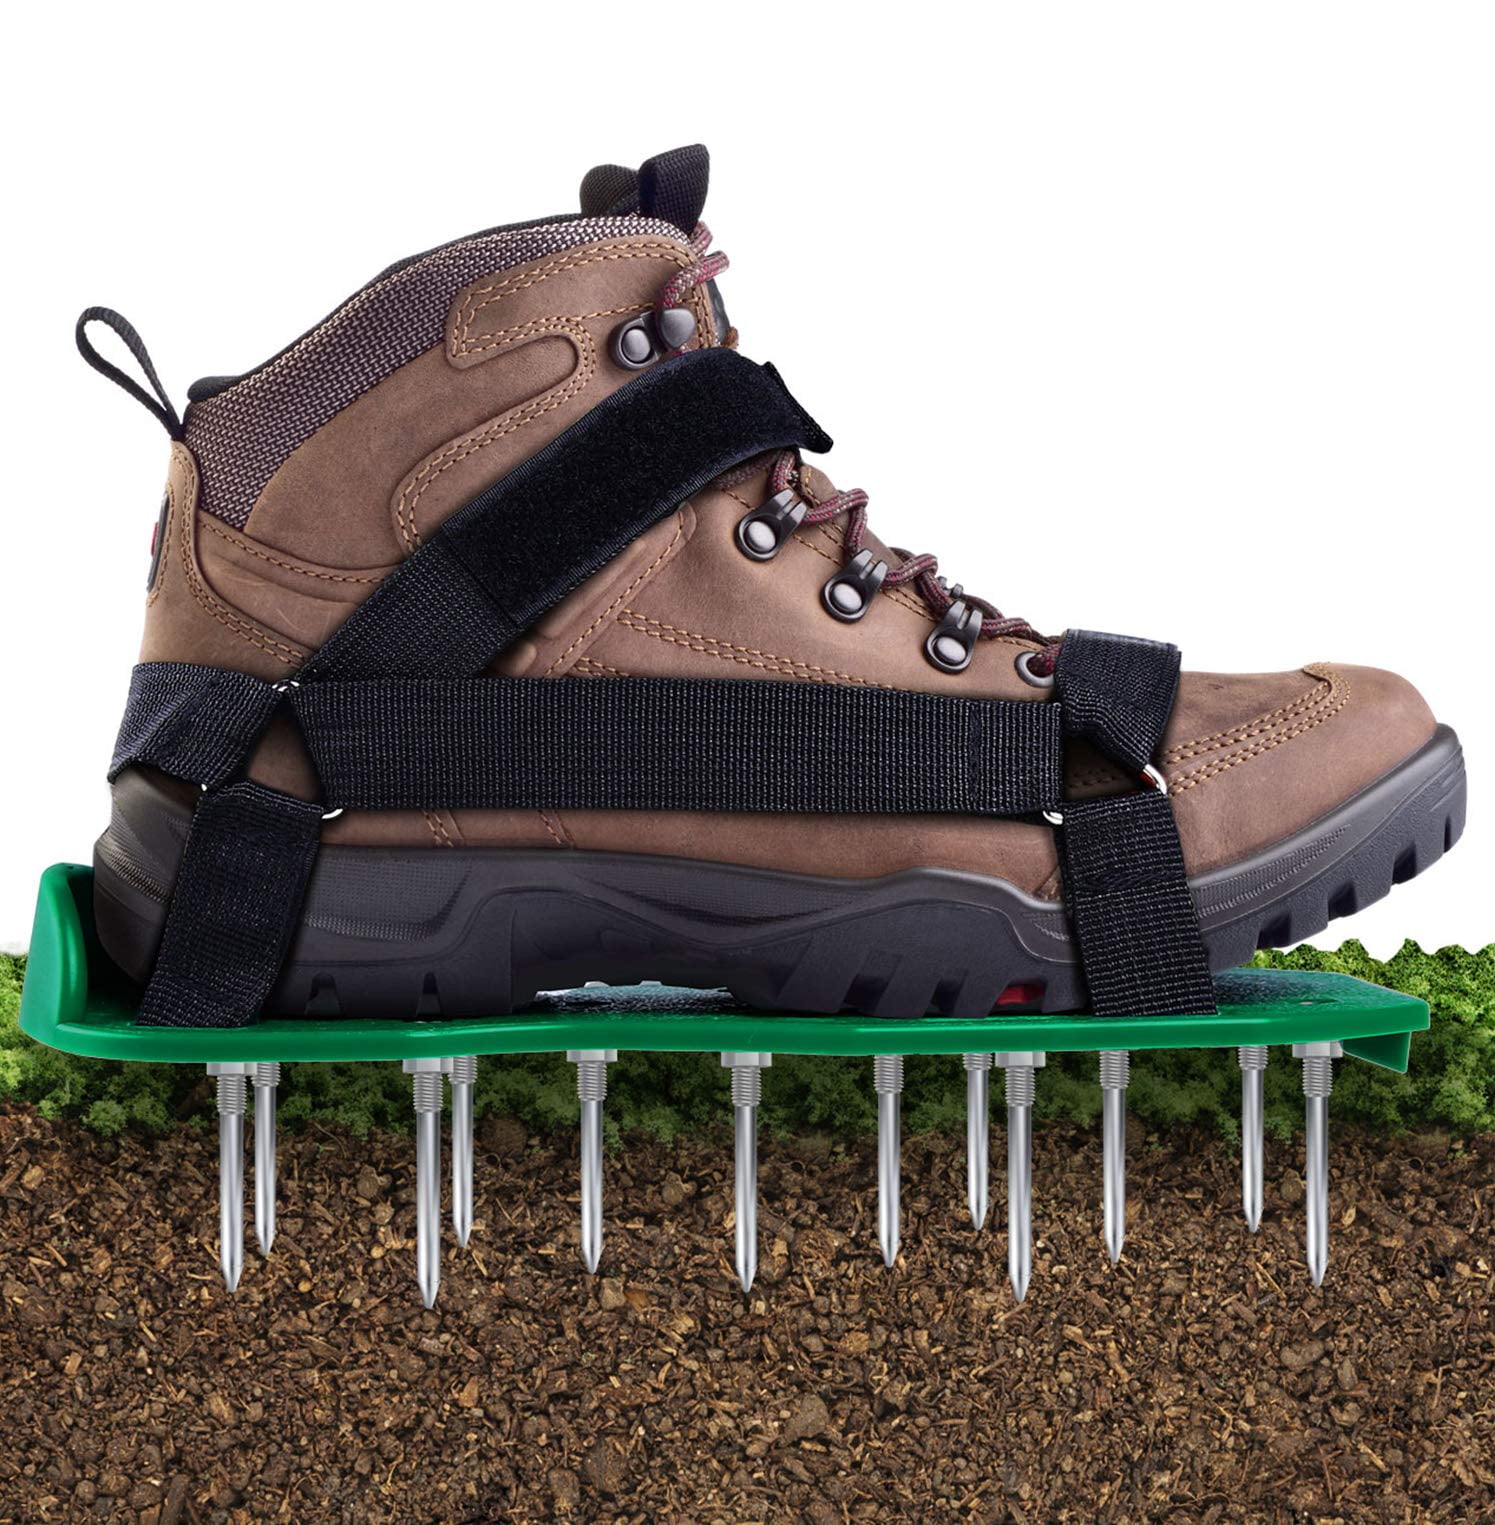 Universal Size Lawn Aerator Shoes,with 3 Adjustable Straps Aerator Spiked Sandals for Effectively Aerating Lawn Soil and A Healthier Yard Garden,Green